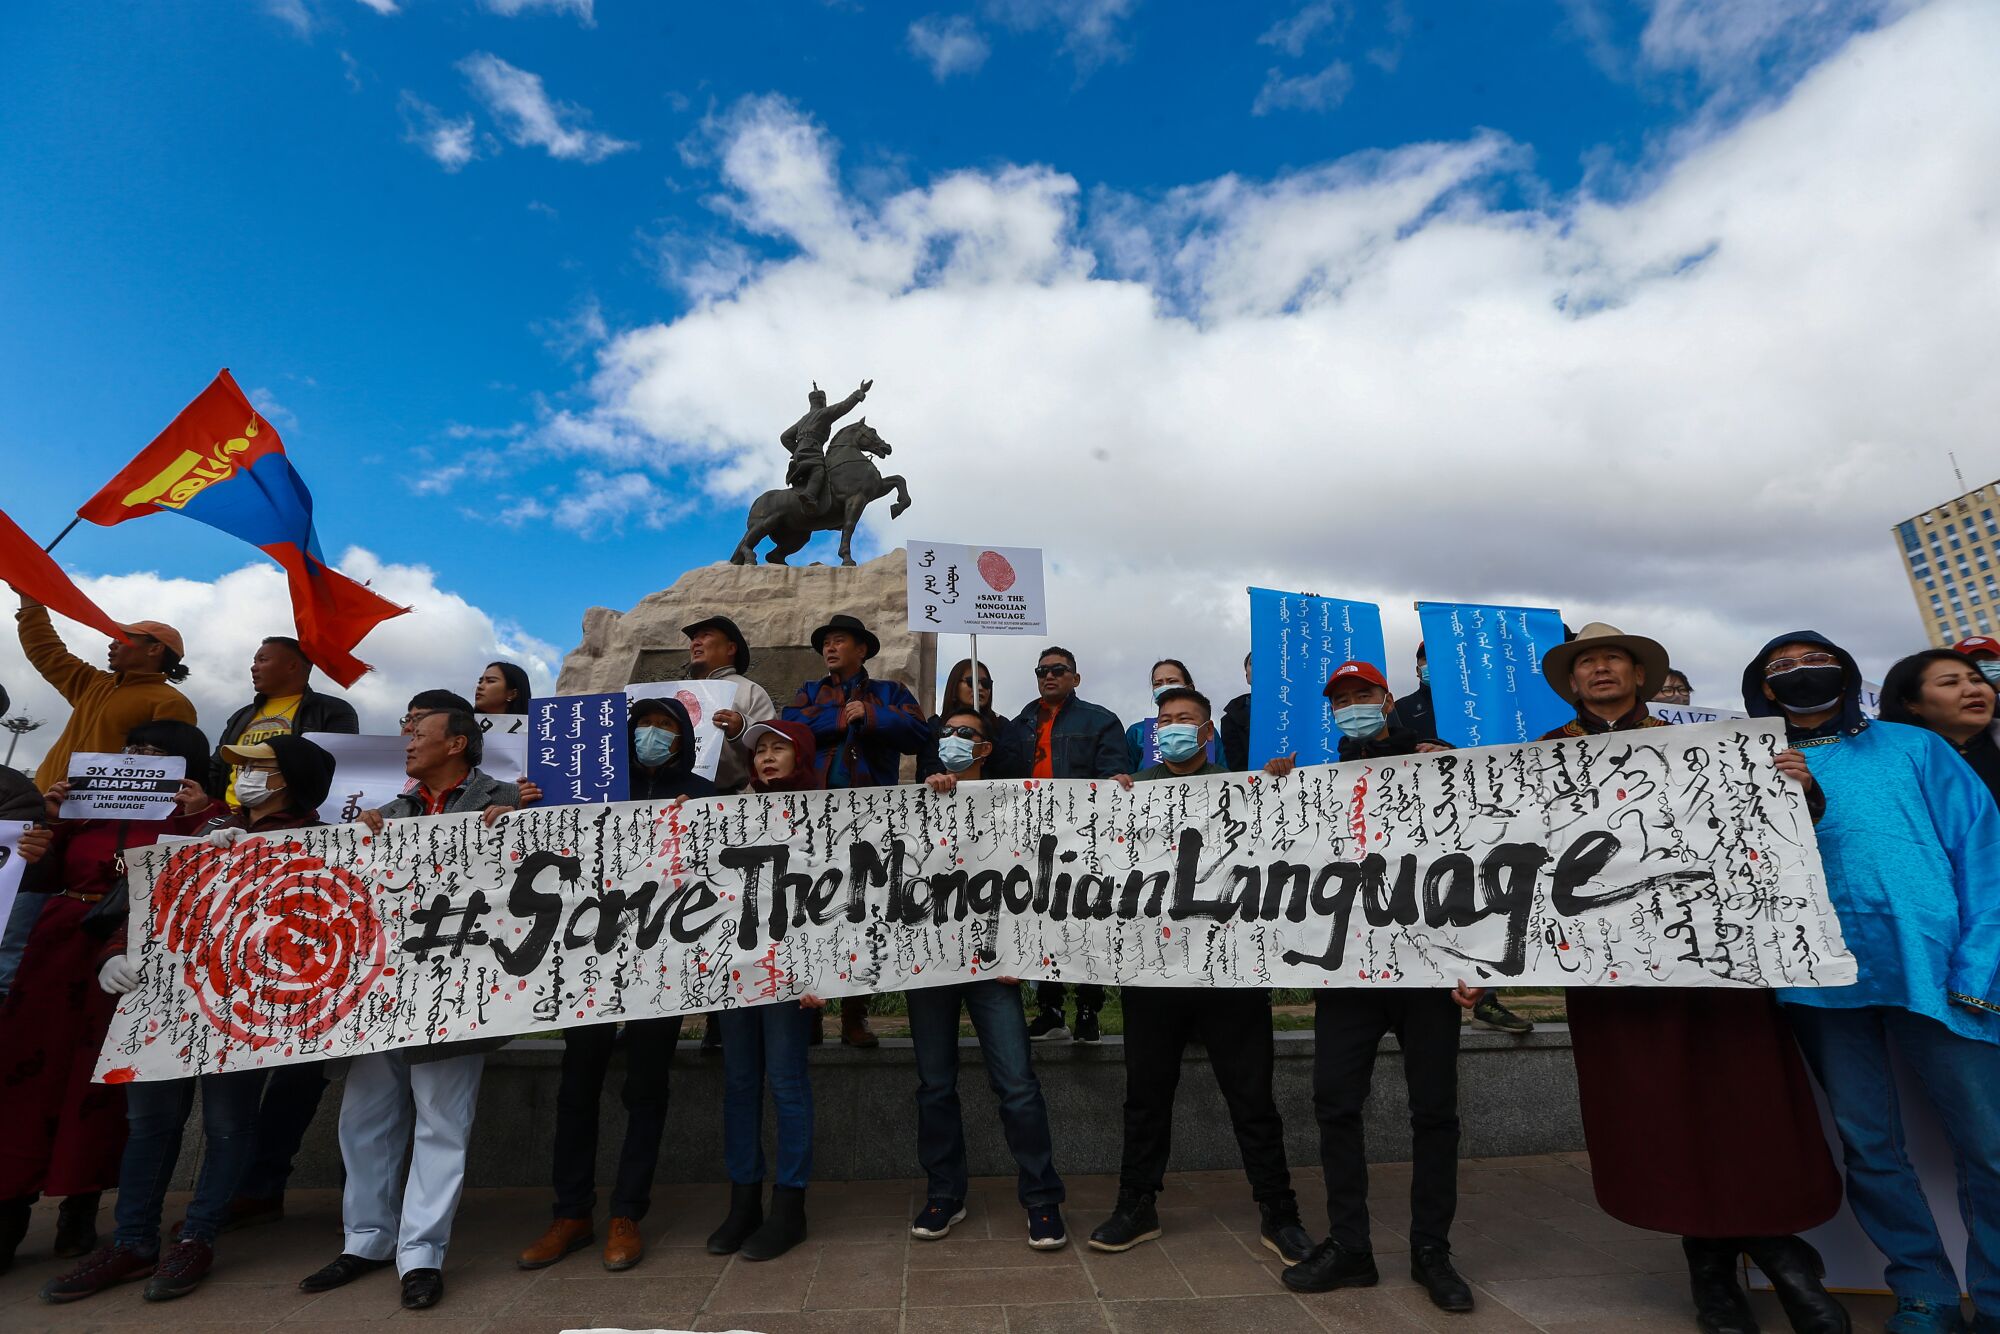 Mongolians march in a line holding a banner reading "Save the Mongolian Language" in English